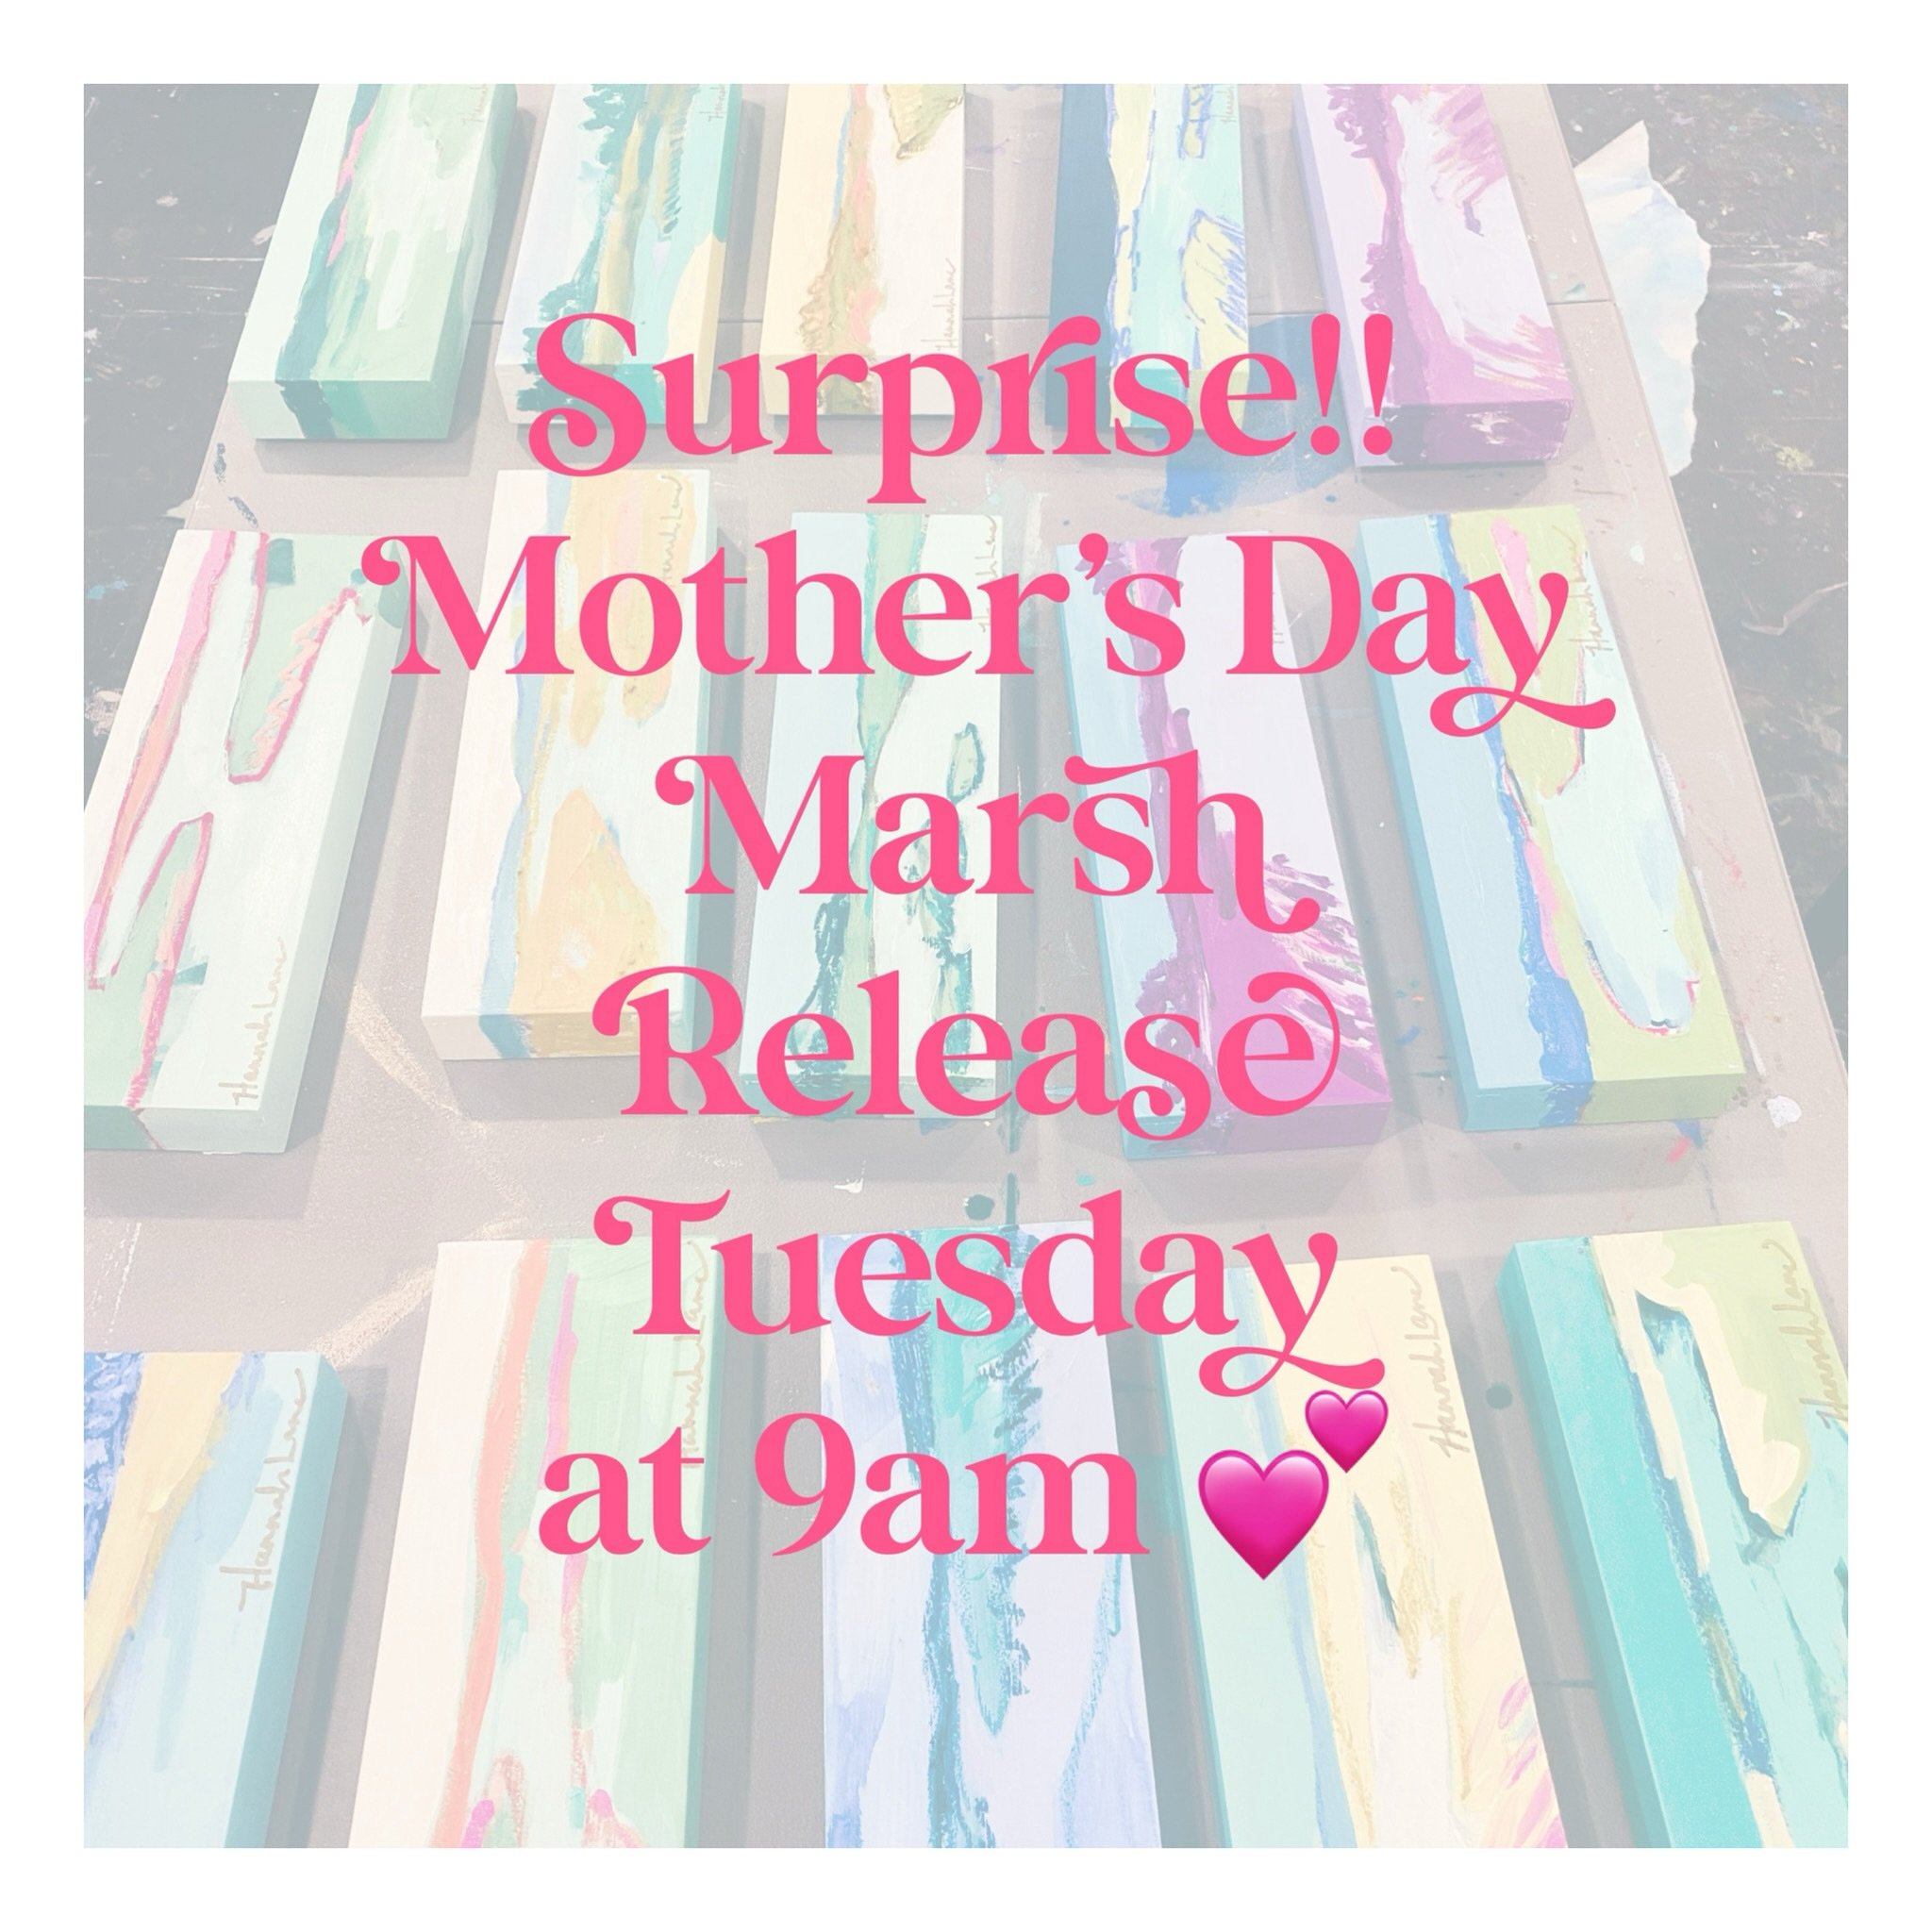 Surprise 💕💕

If you are last minute grabbing that special gift for the Moms in your life, I got you! I am releasing 20, 12x4 Mother&rsquo;s Day Marsh on wood panel tomorrow at 9am cst. Set your alarms ⏰ and get those fingers ready to &ldquo;comment